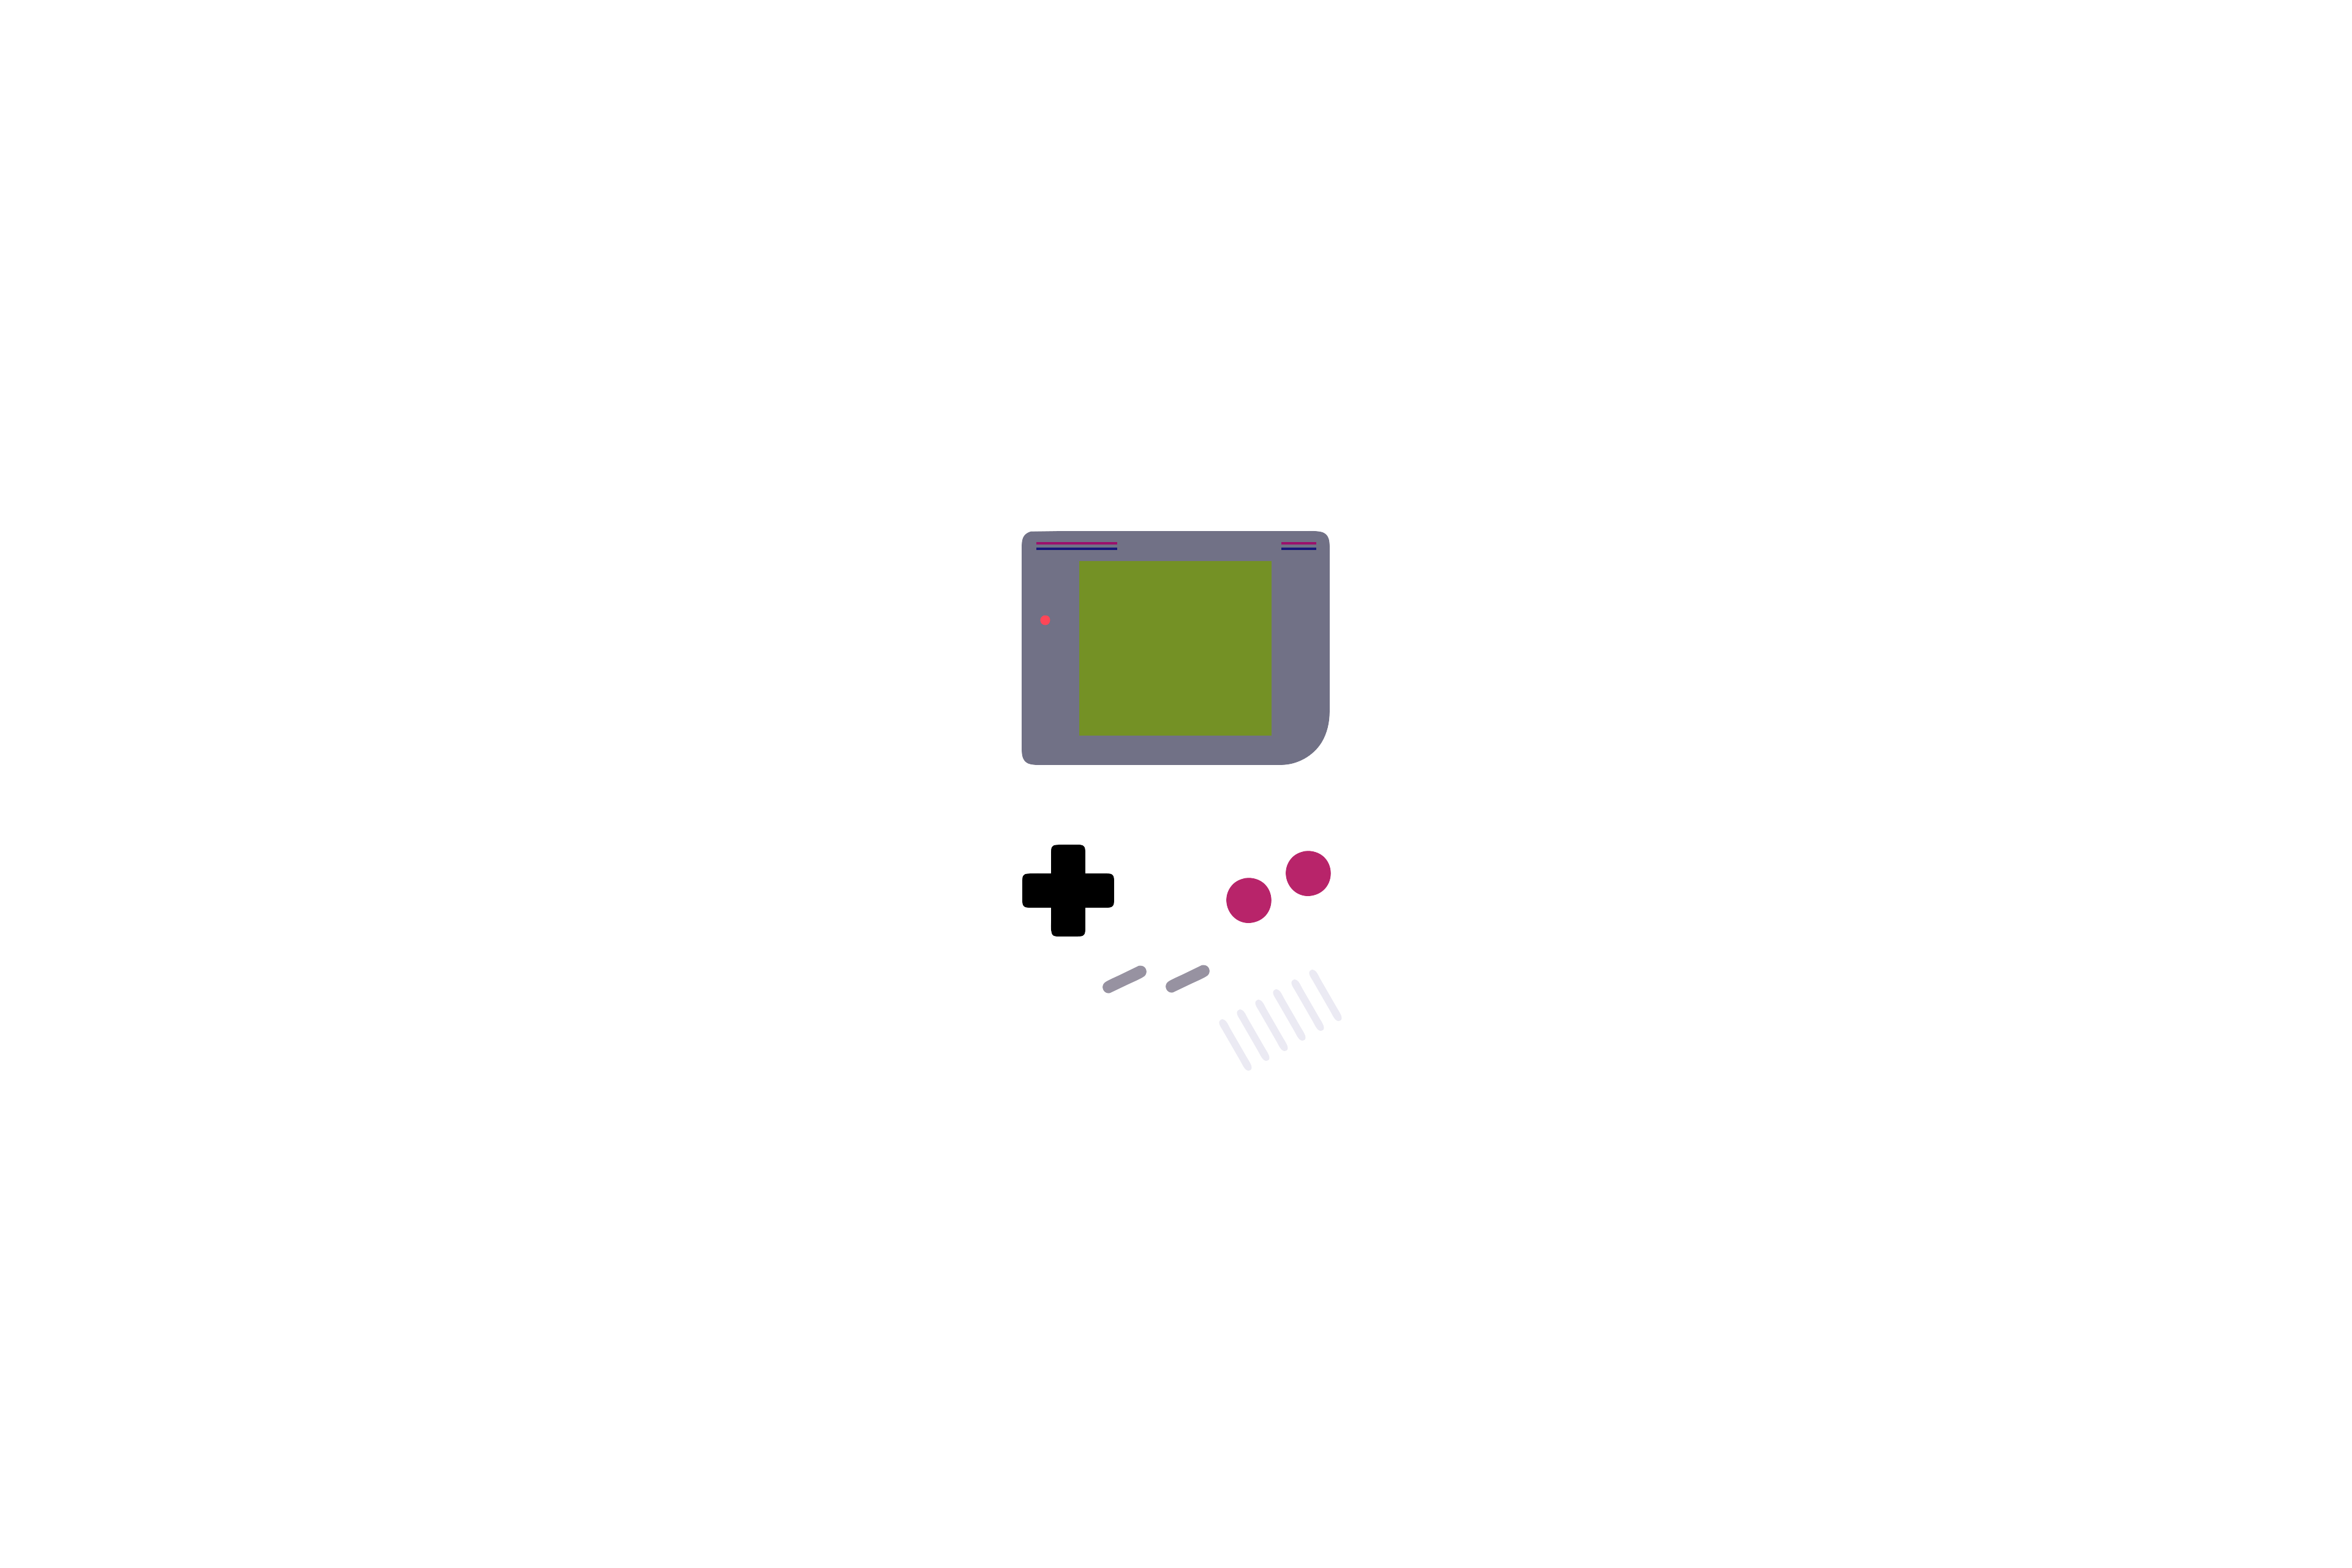 Game Boy Minimalism, HD Artist, 4k Wallpaper, Image, Background, Photo and Picture